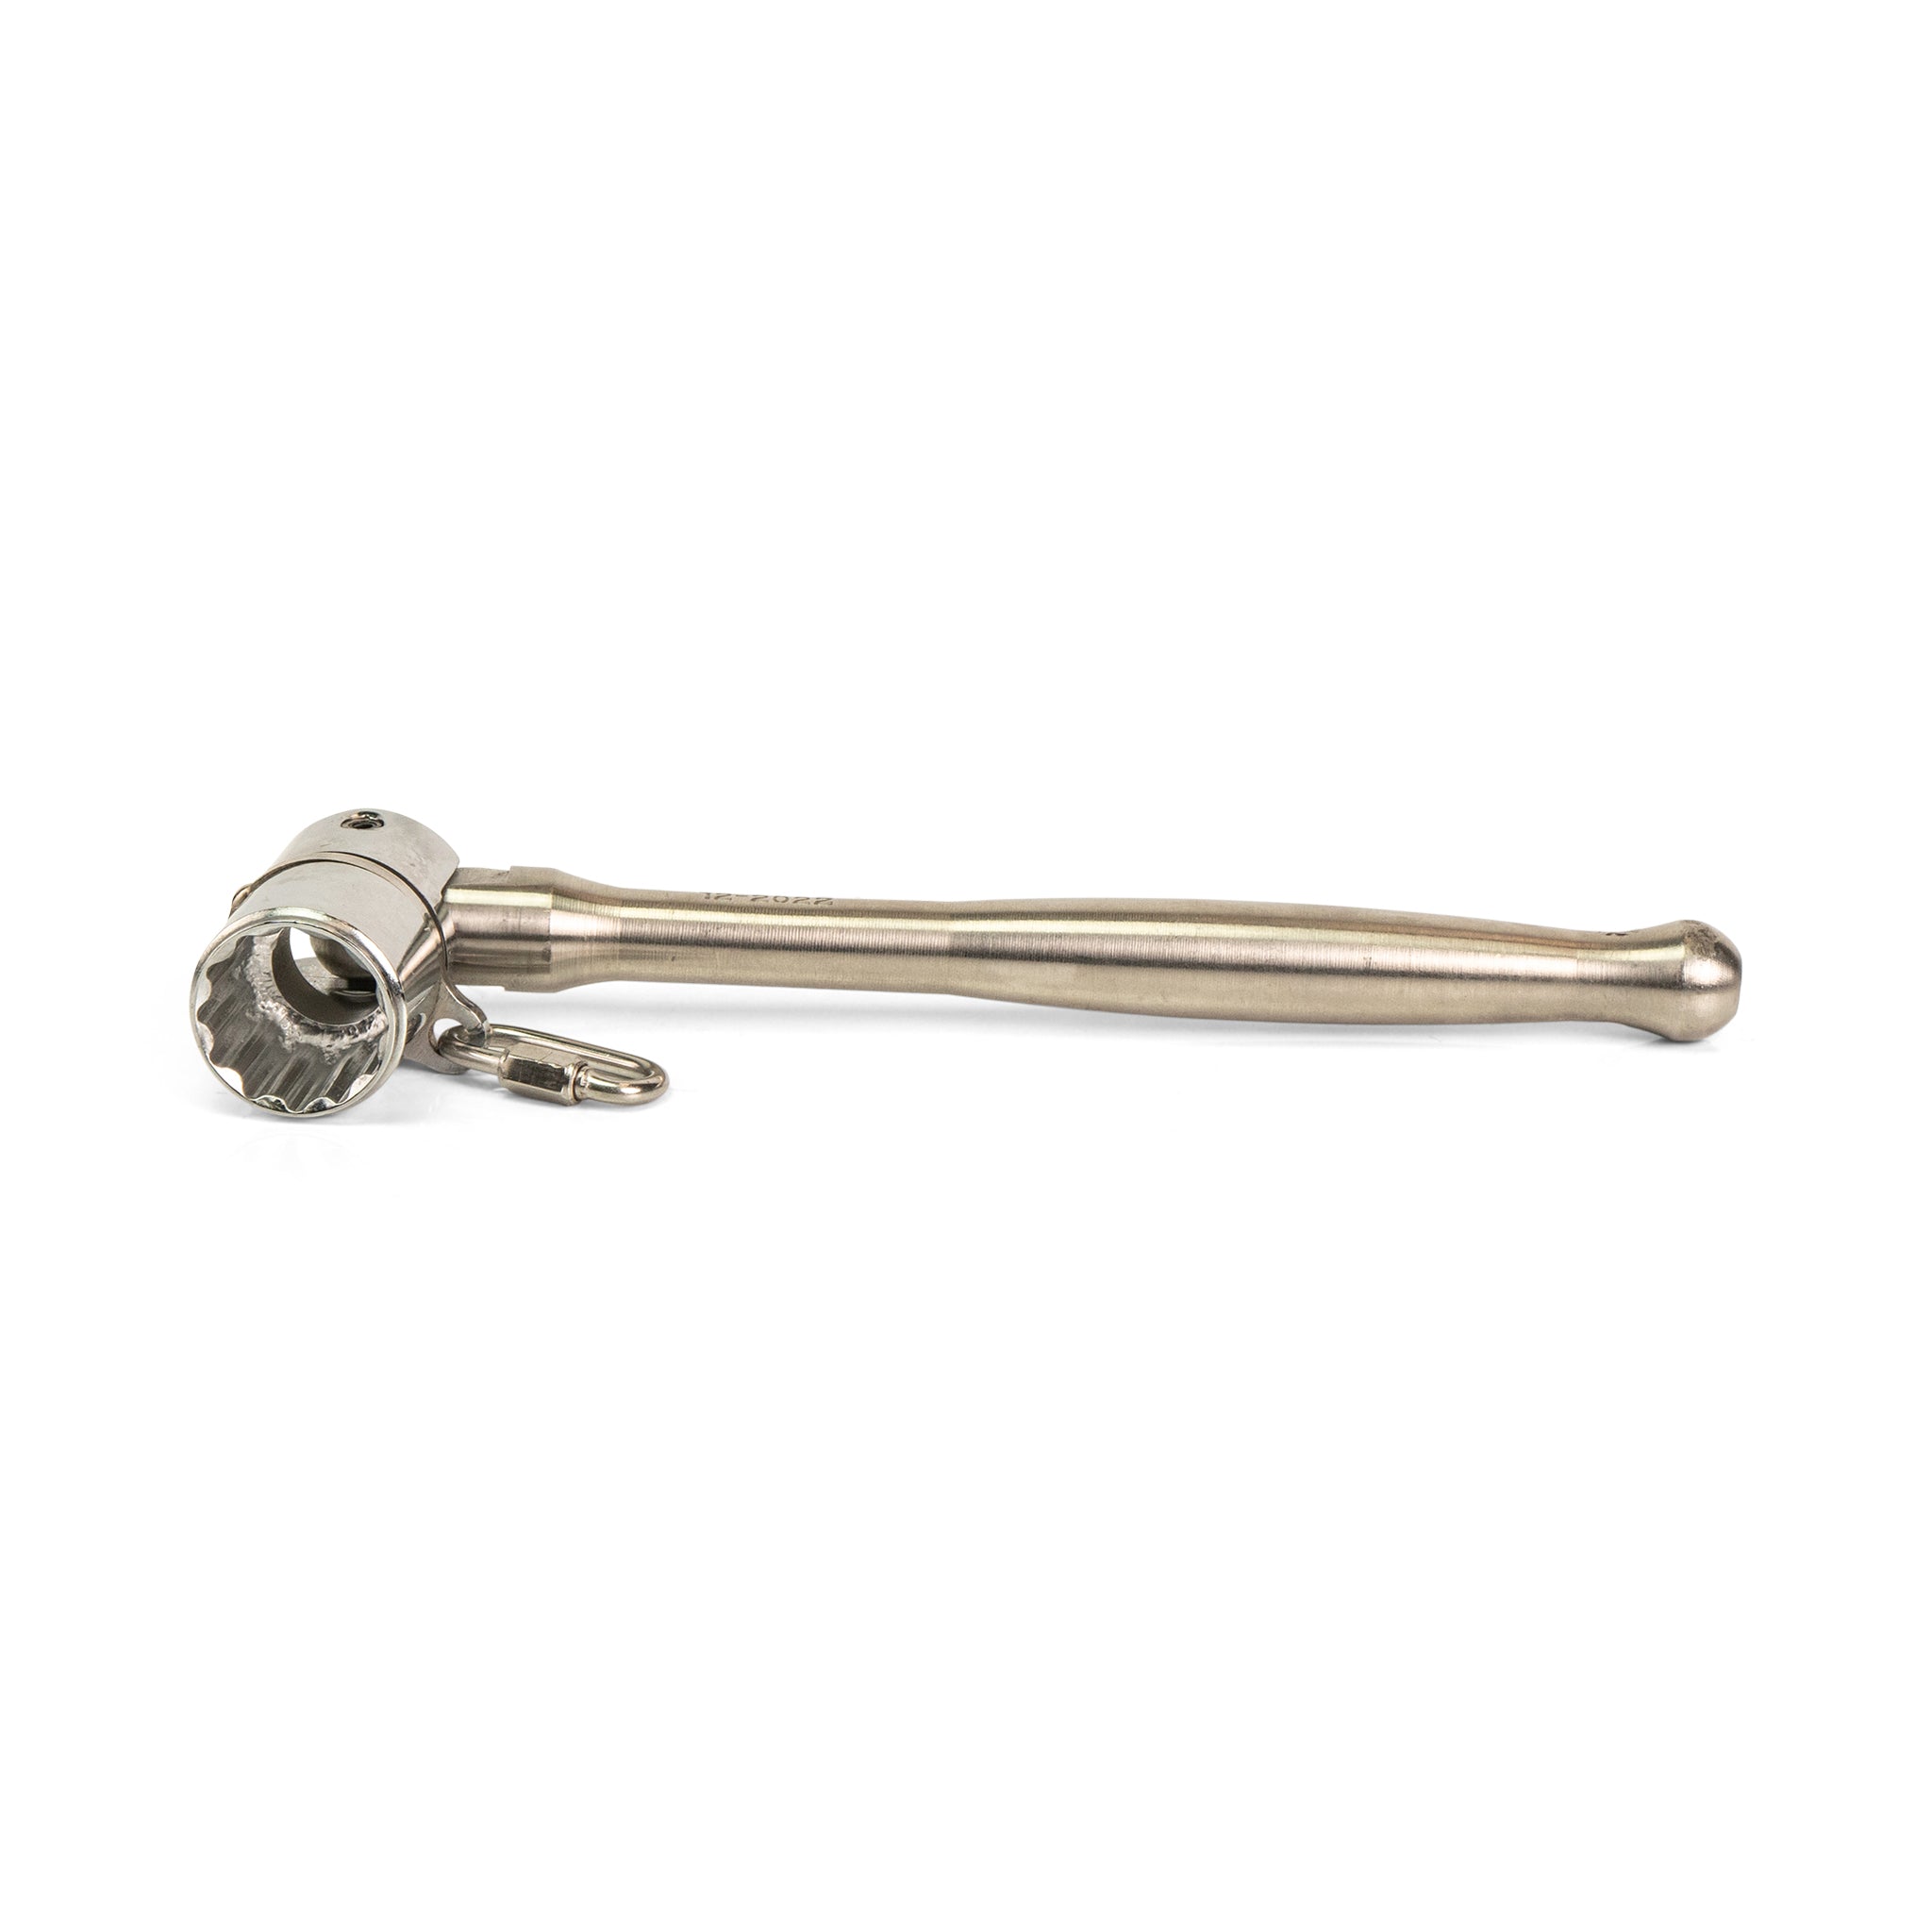 Stainless Steel Scaffold Key with Ring Head Attachment